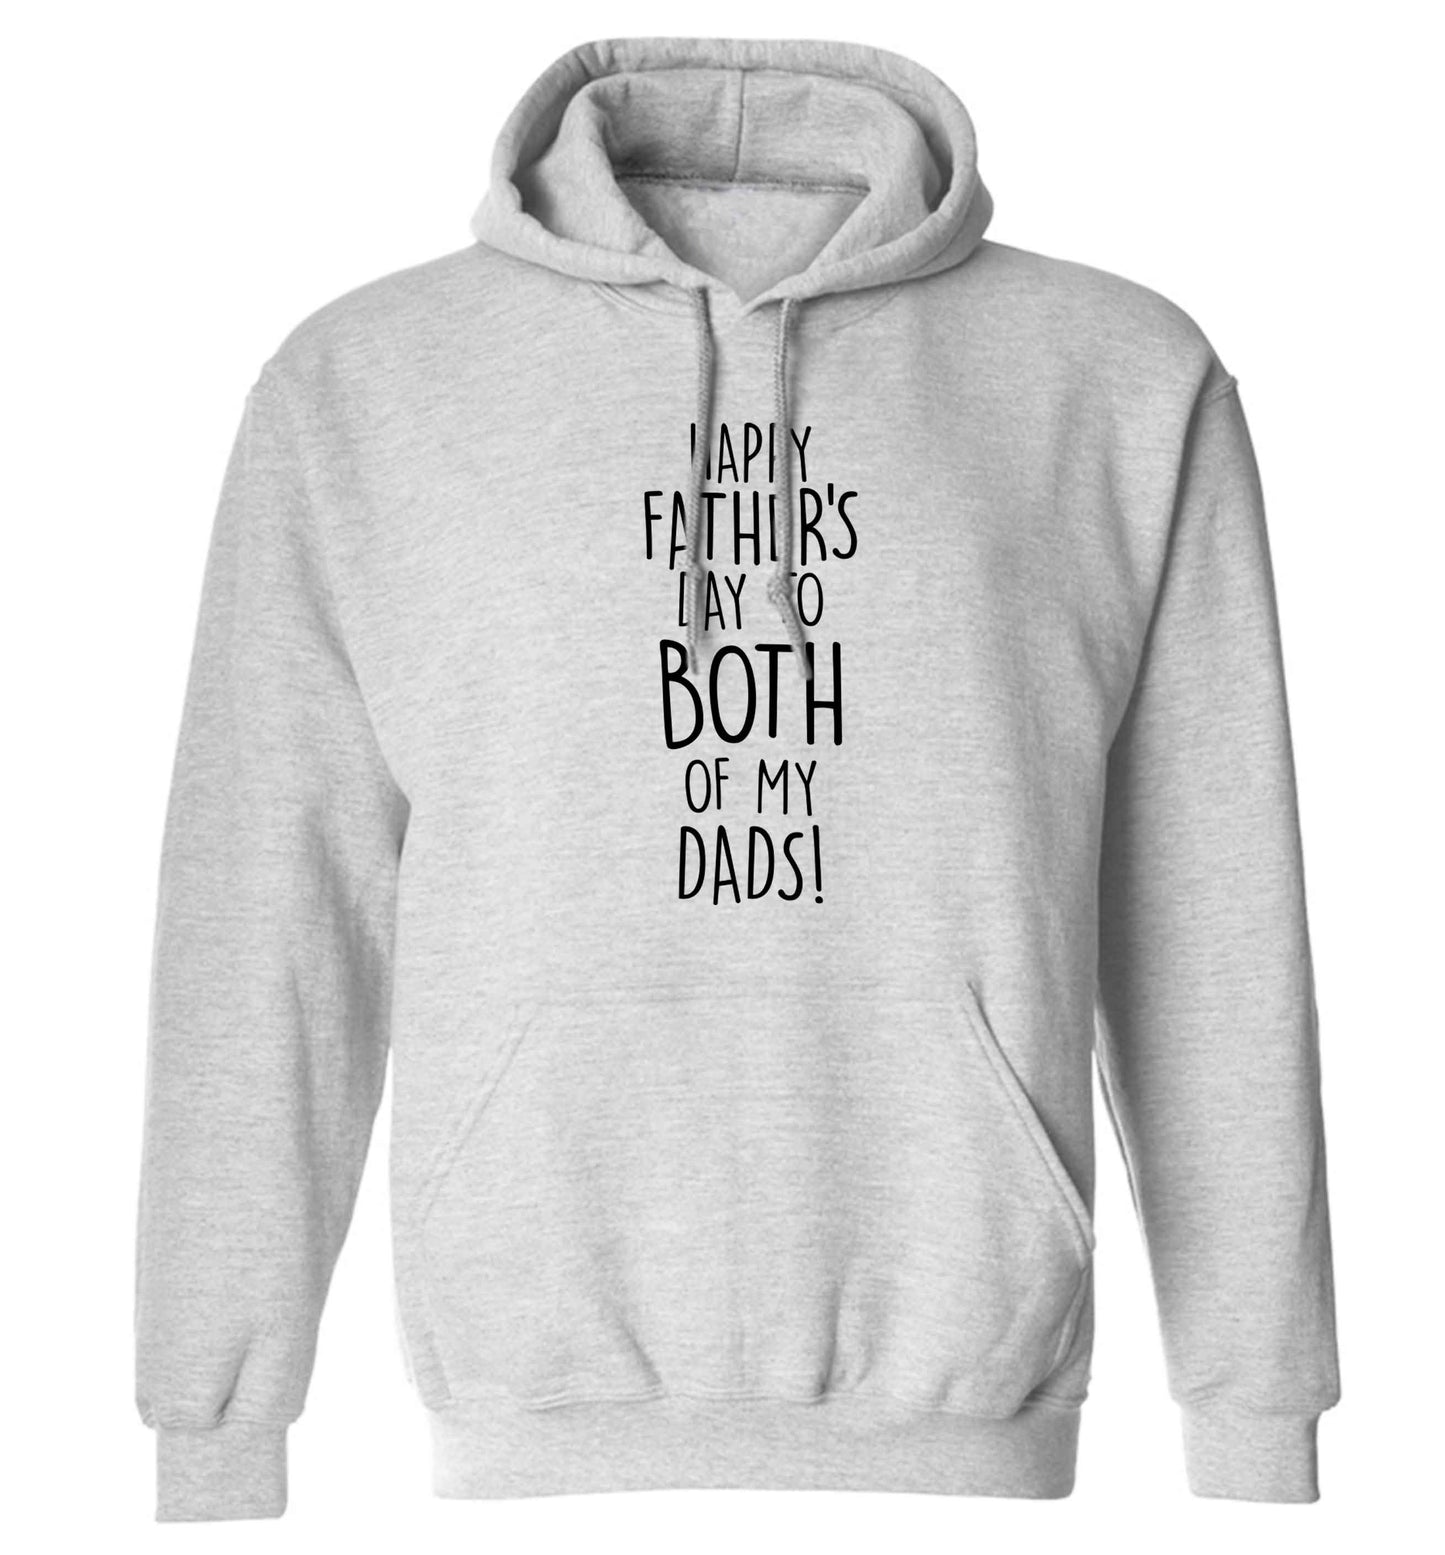 Happy Father's day to both of my dads adults unisex grey hoodie 2XL